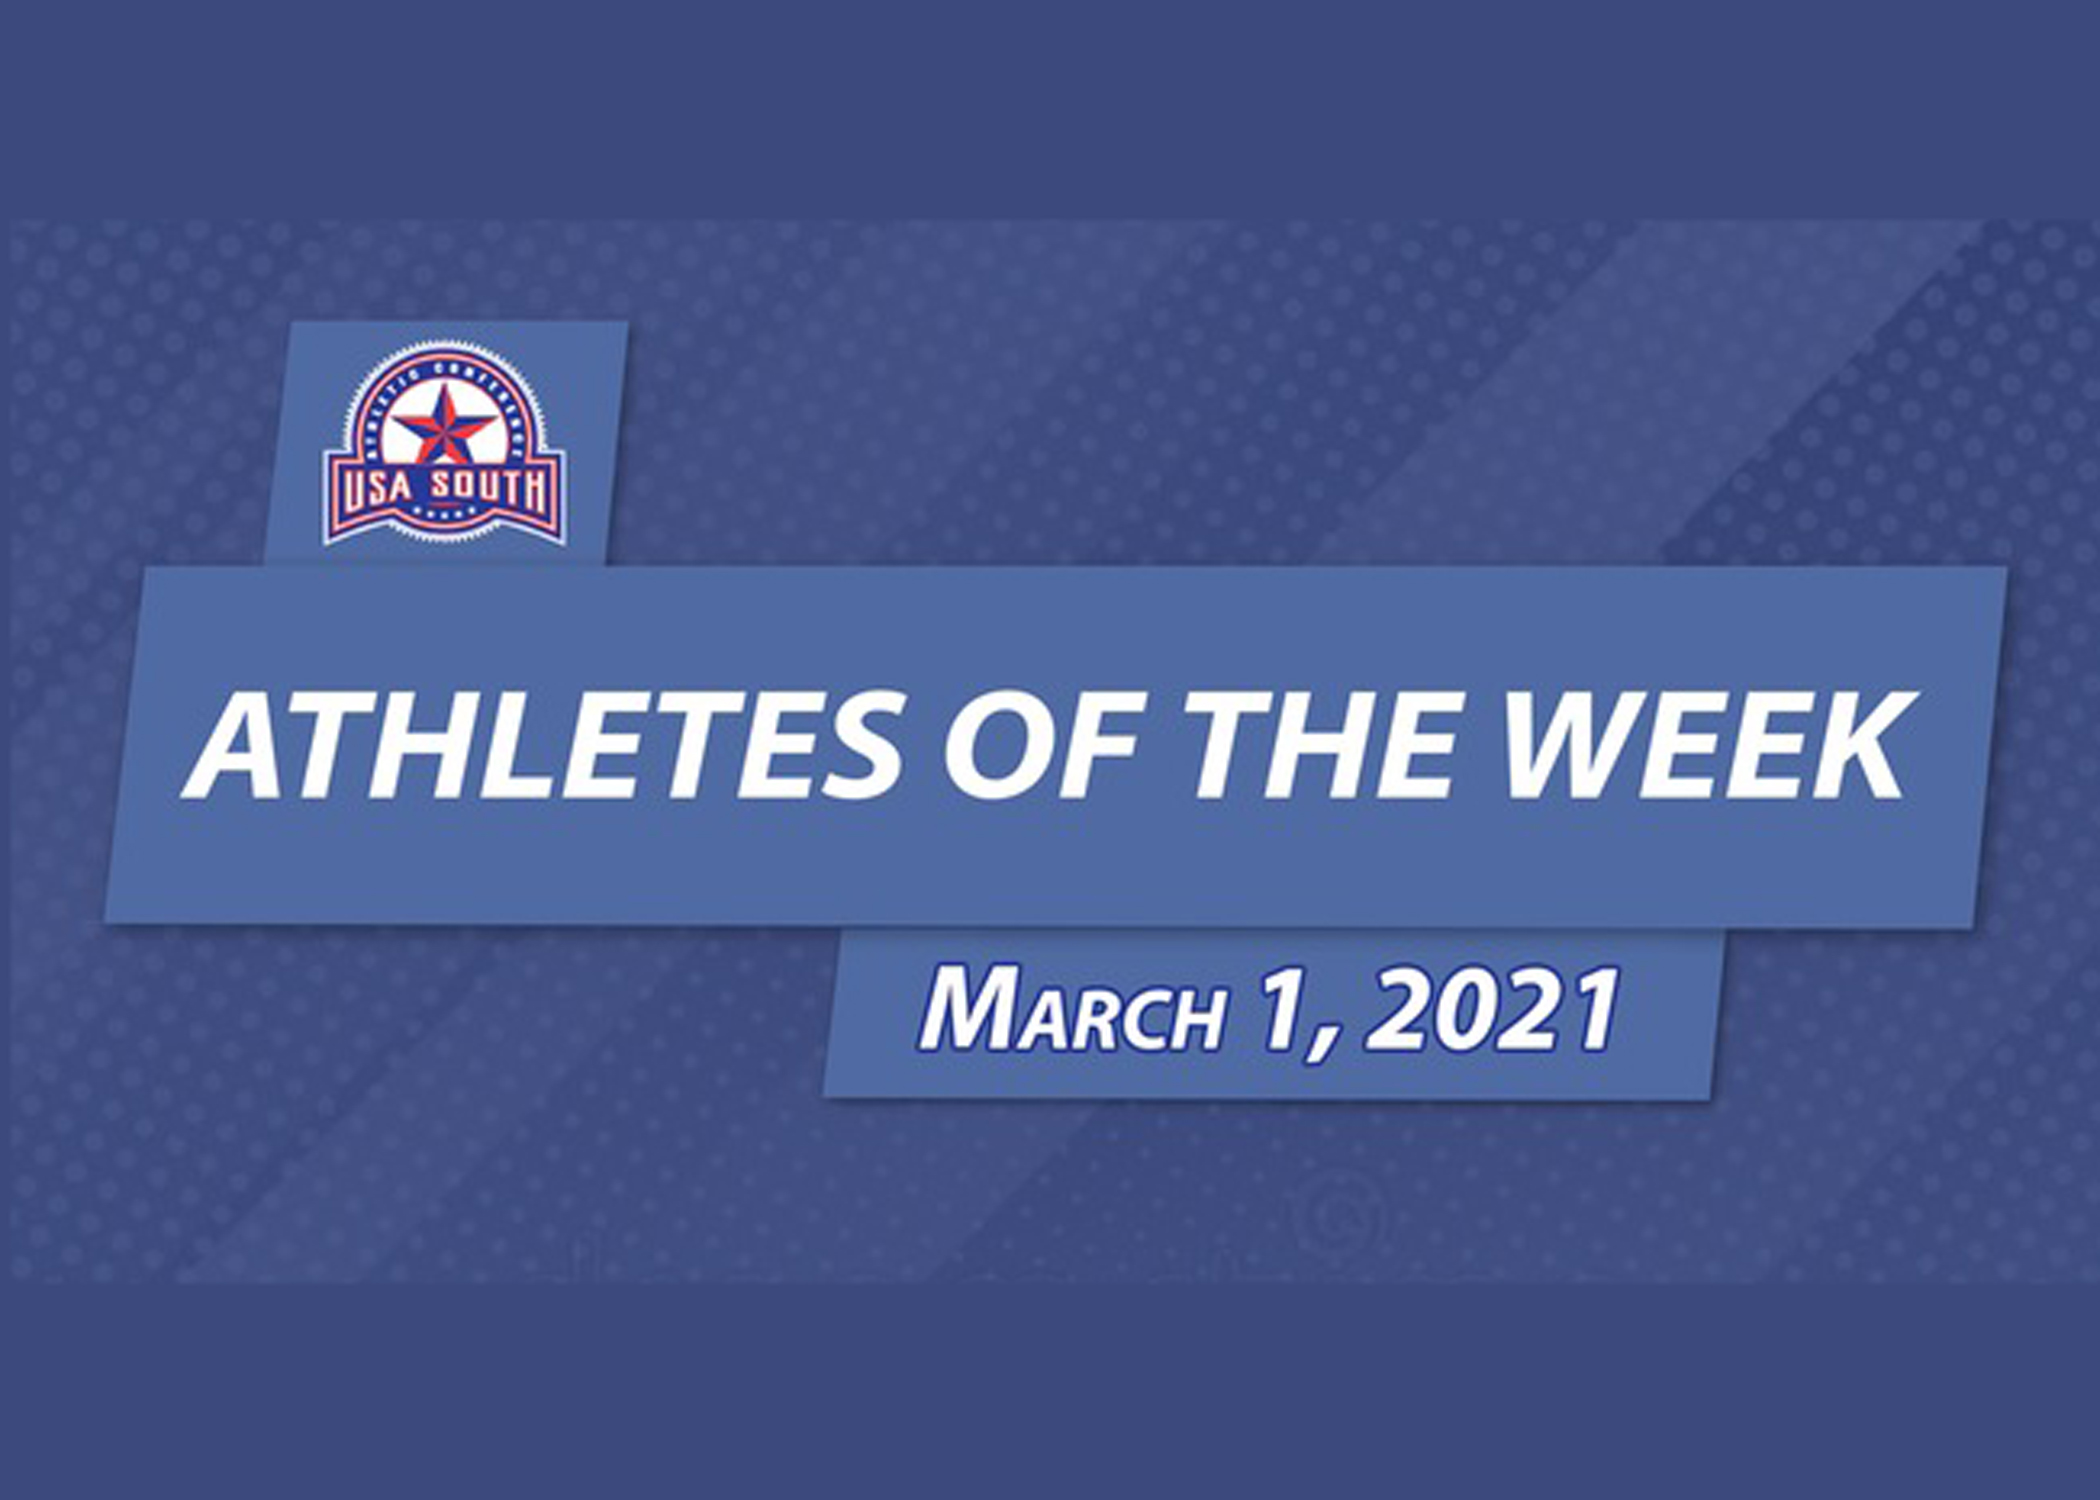 USA South Athletes of the Week - March 1, 2021